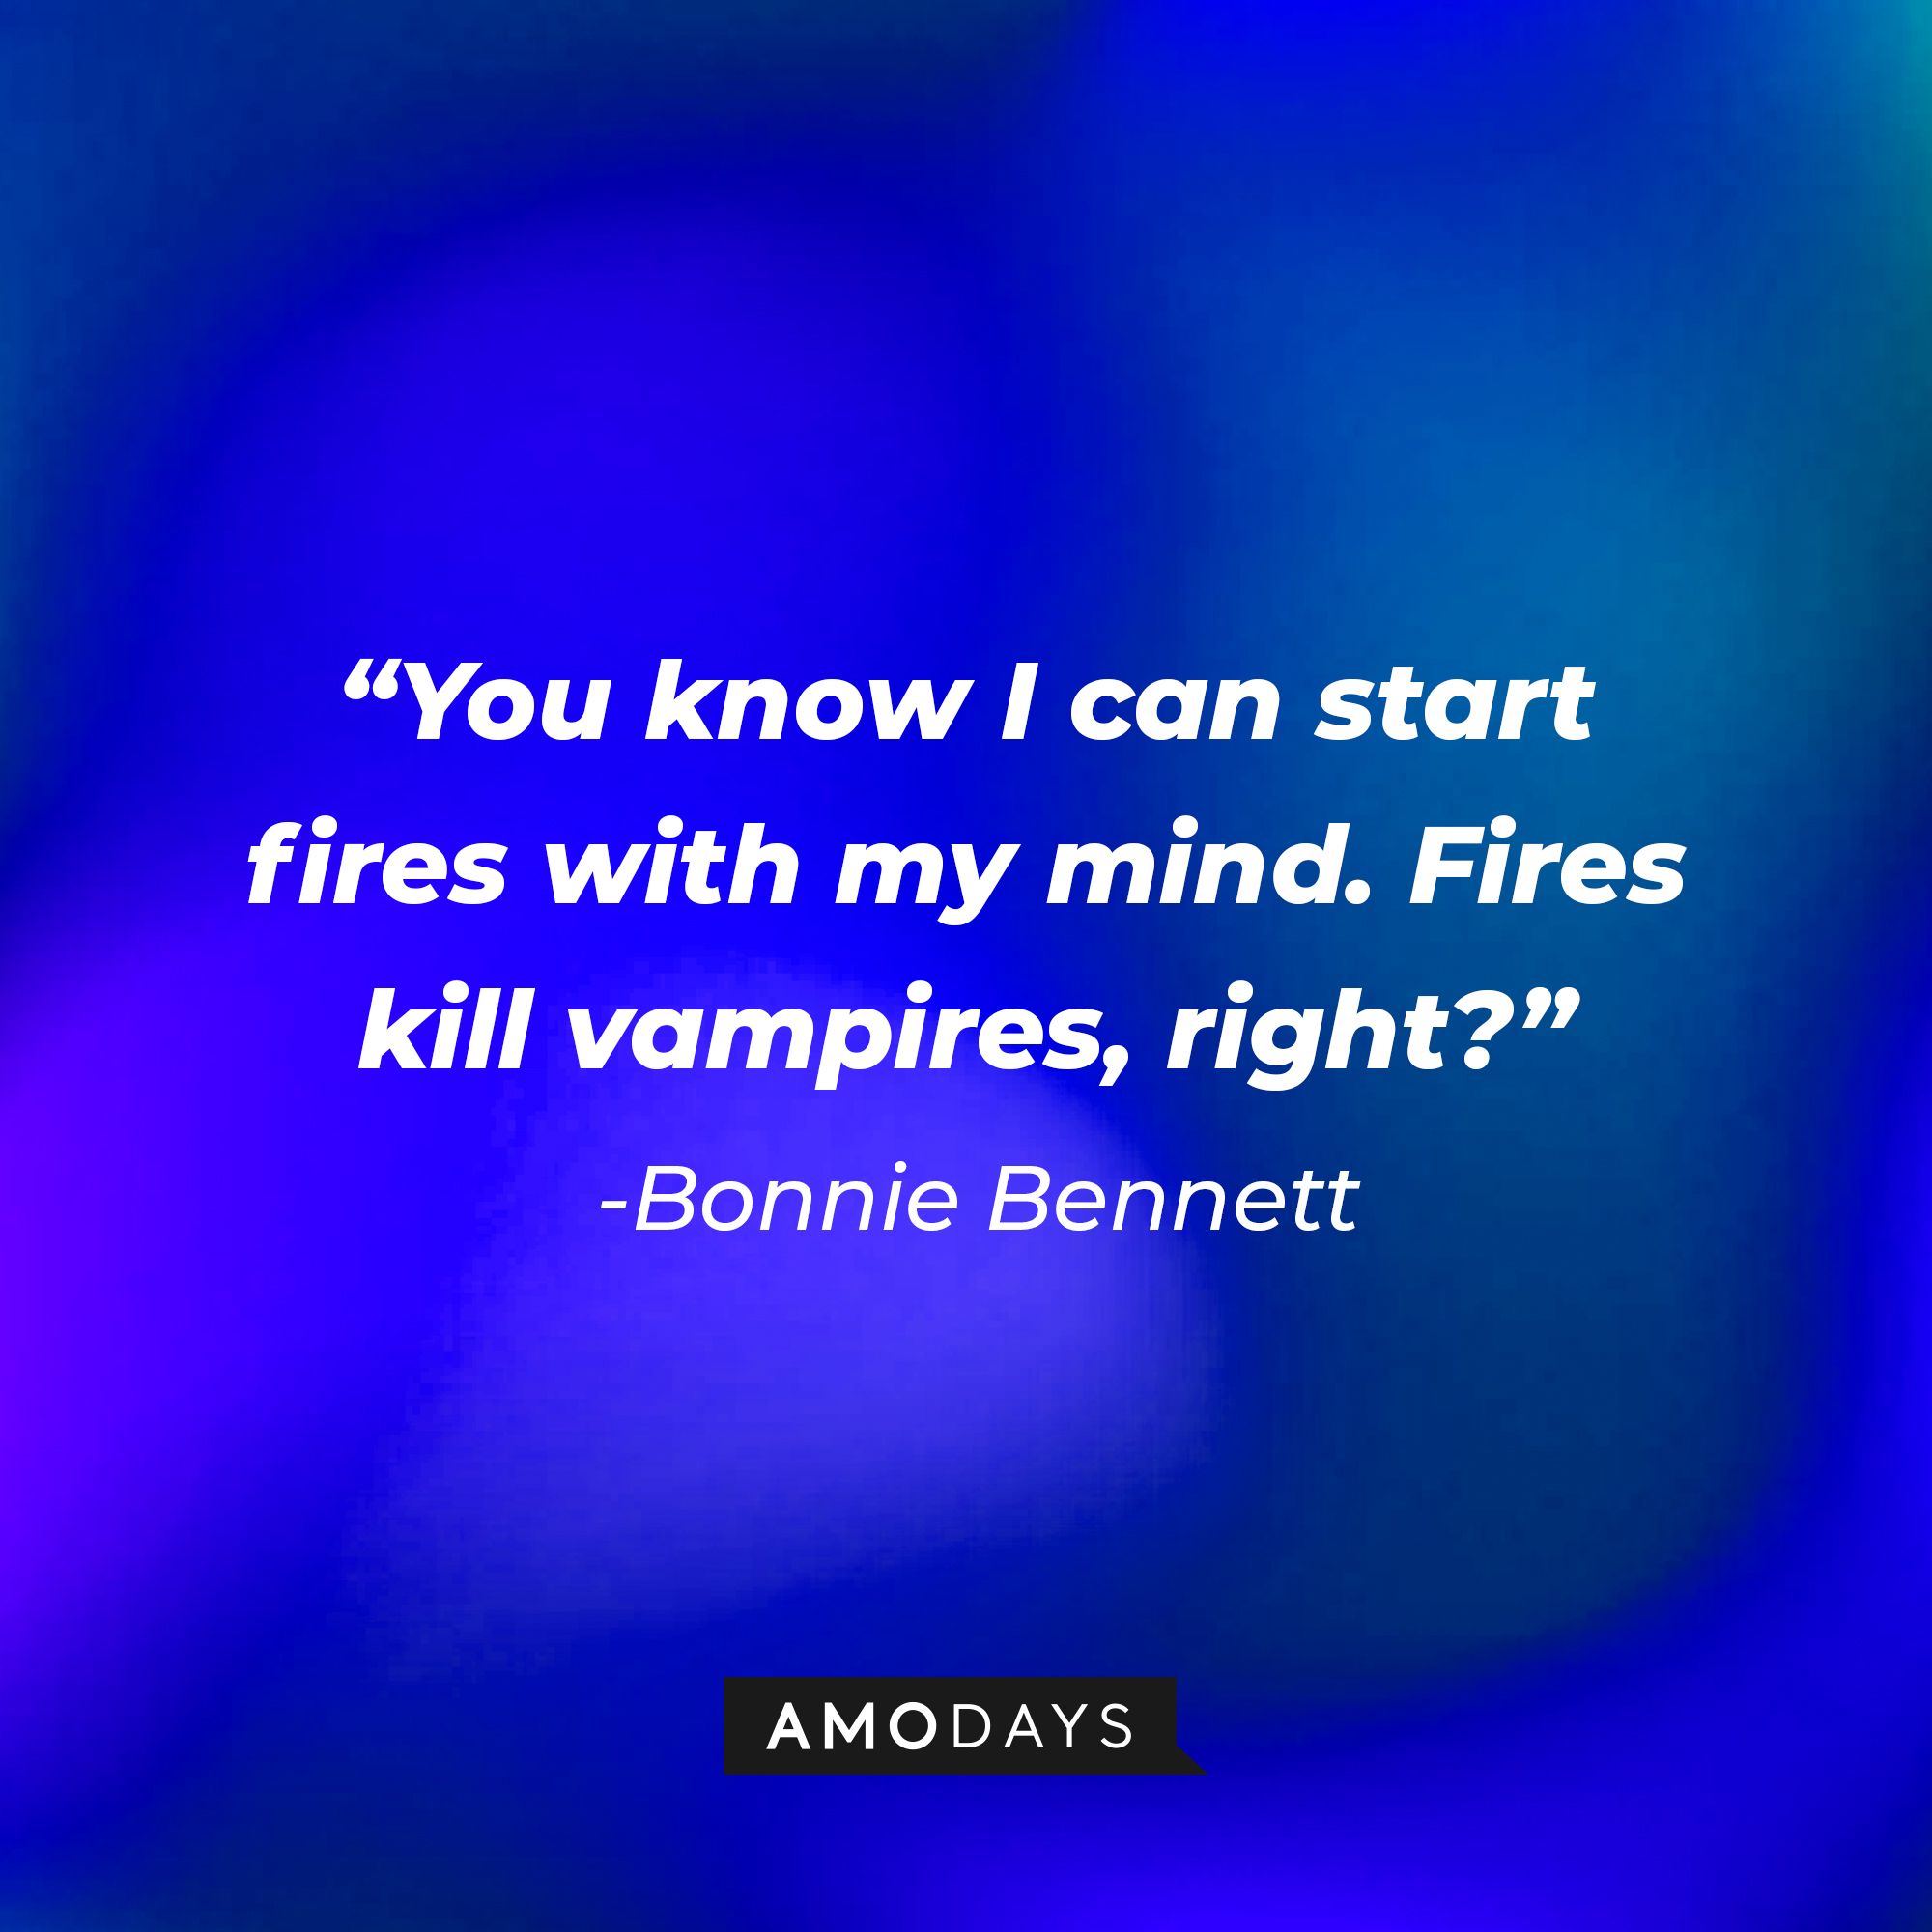 Bonnie Bennett’s quote: “You know I can start fires with my mind. Fires kill vampires, right?” | Source: AmoDays